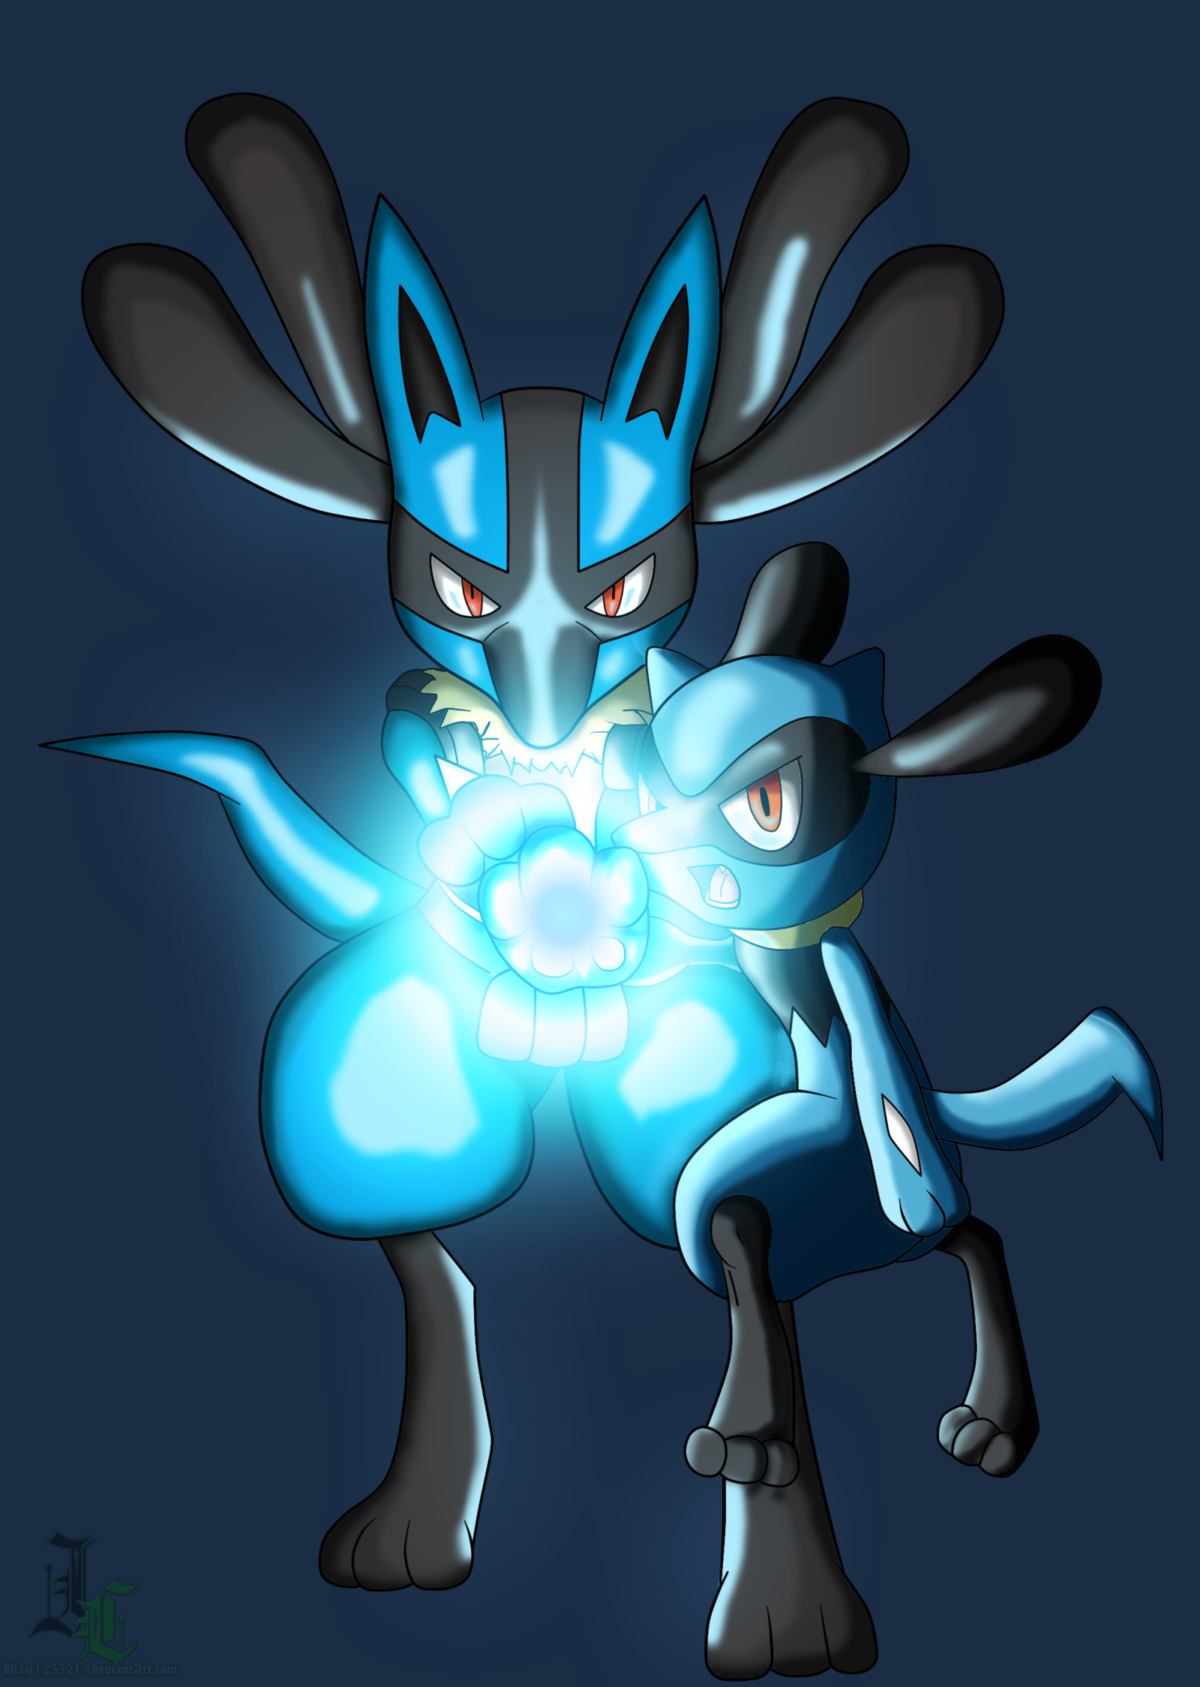 Lucario and Riolu Aura Sphere Colored by JamalC157 on DeviantArt